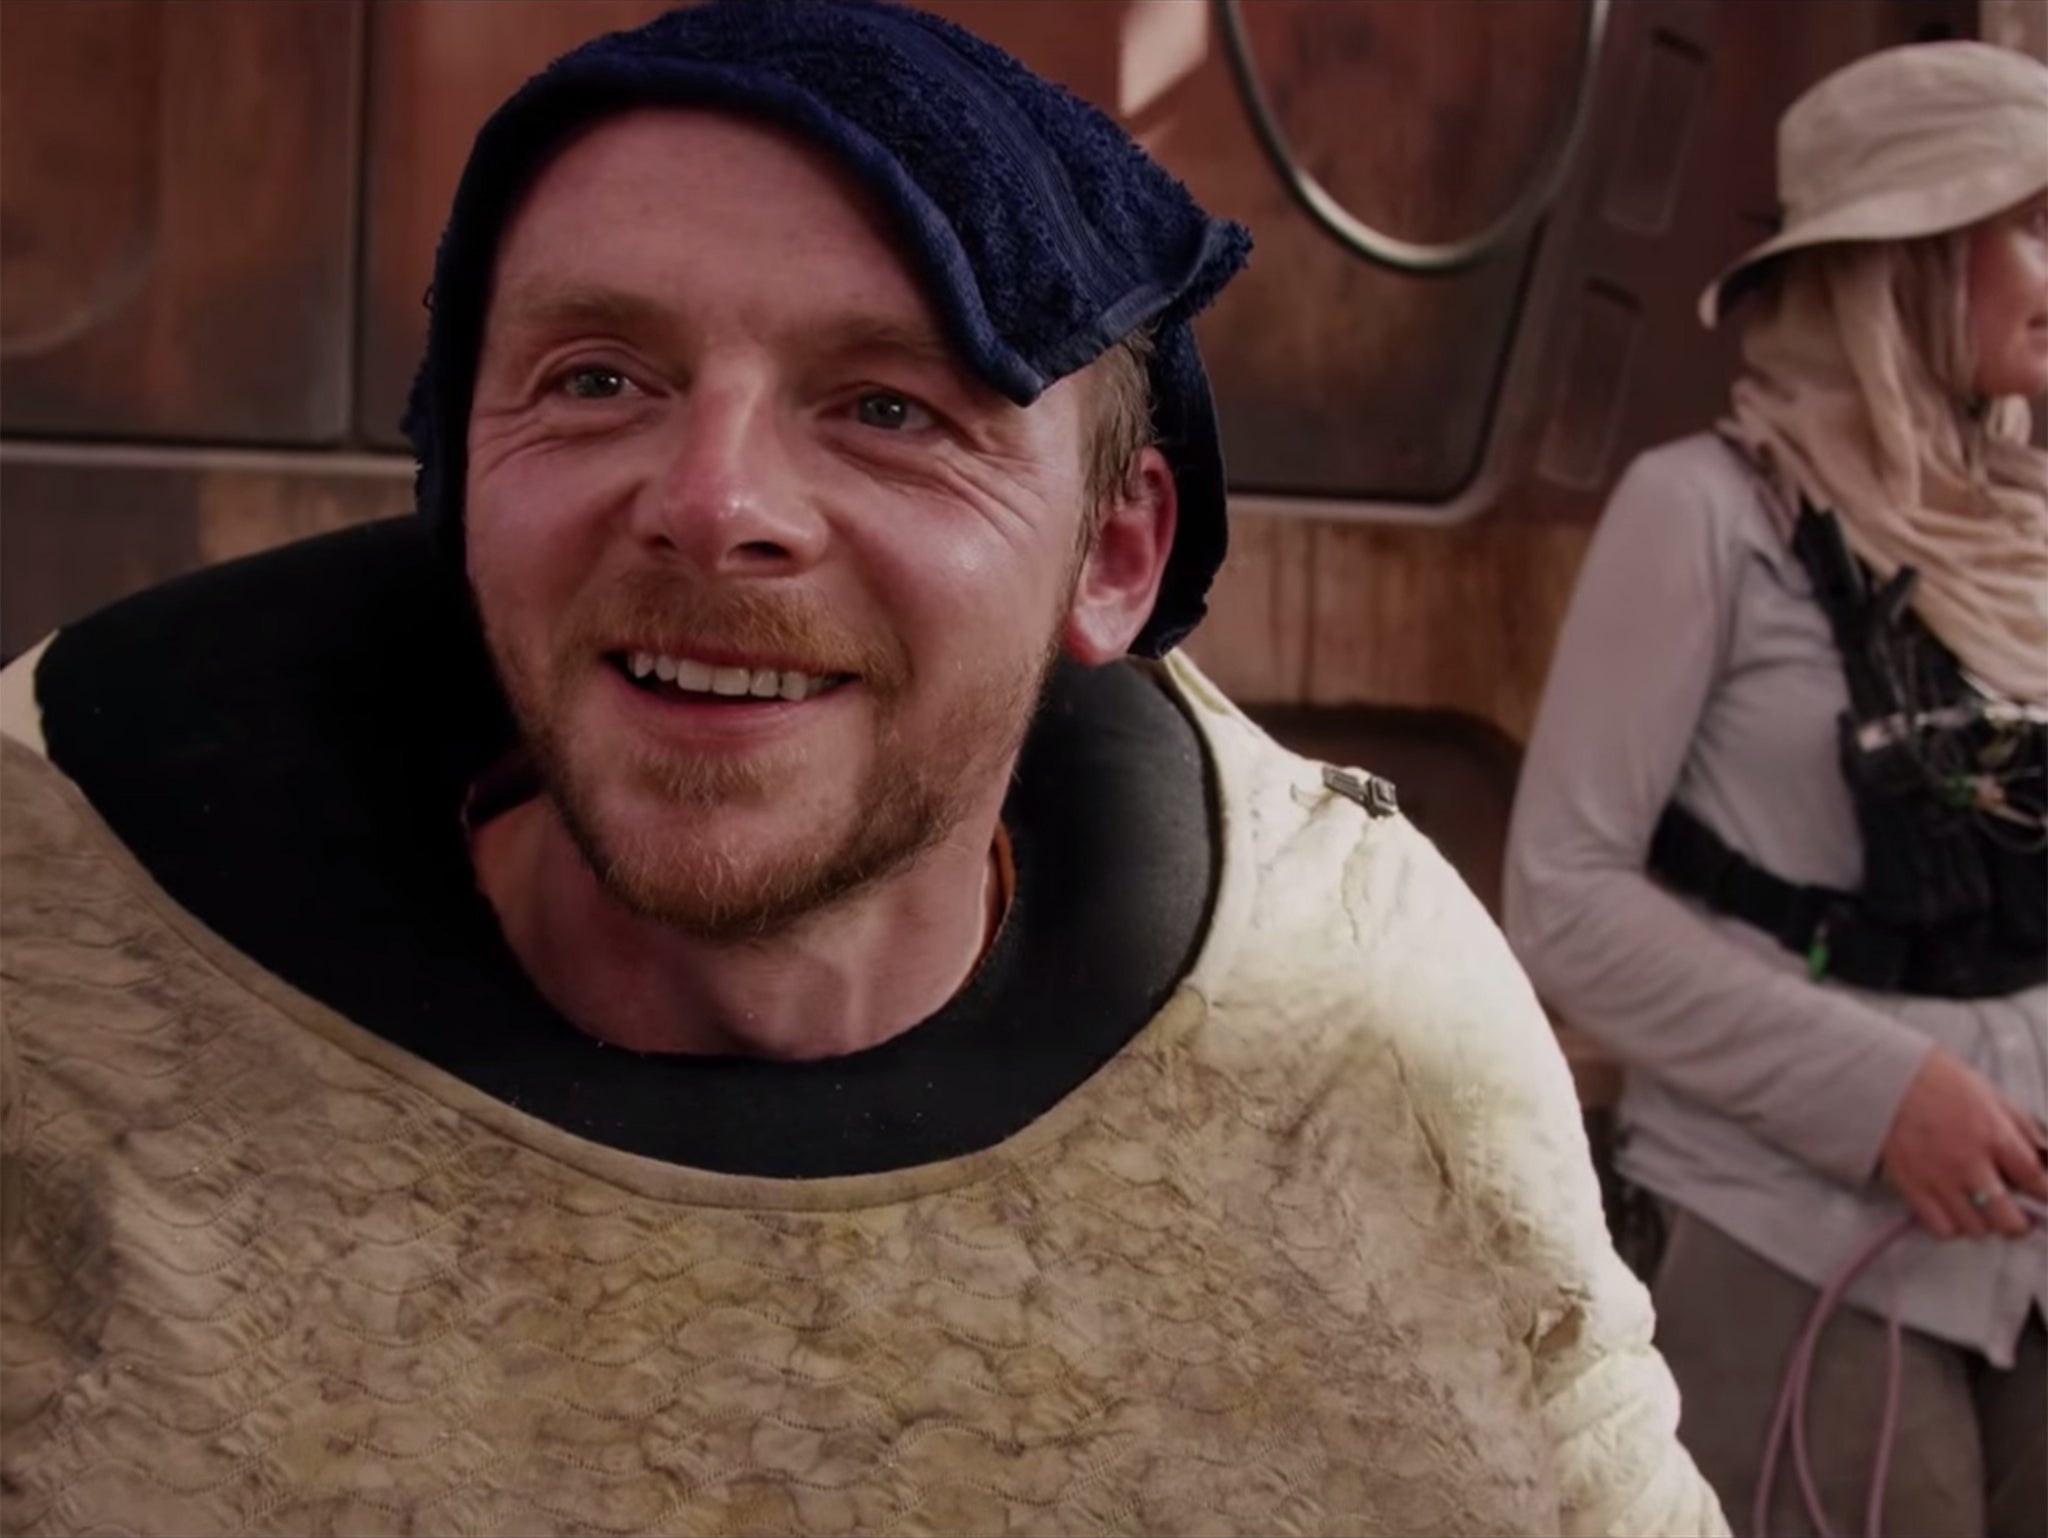 Simon Pegg in costume on the set of Star Wars: The Force Awakens